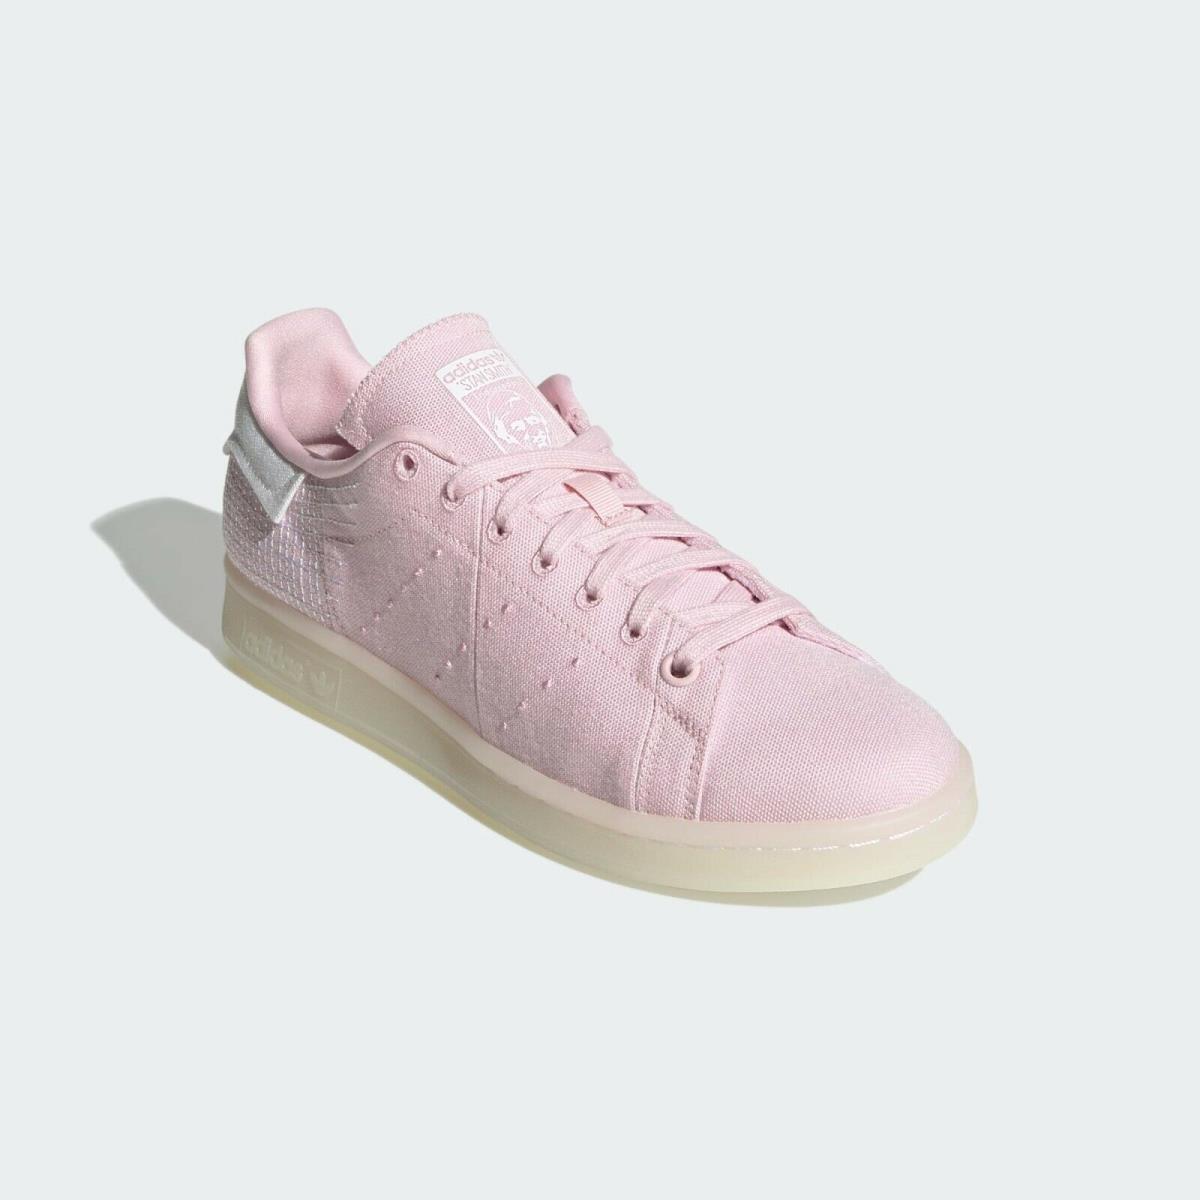 Adidas shoes STAN SMITH PRIMEBLUE - Clear Pink / Cloud White / Core Black 3